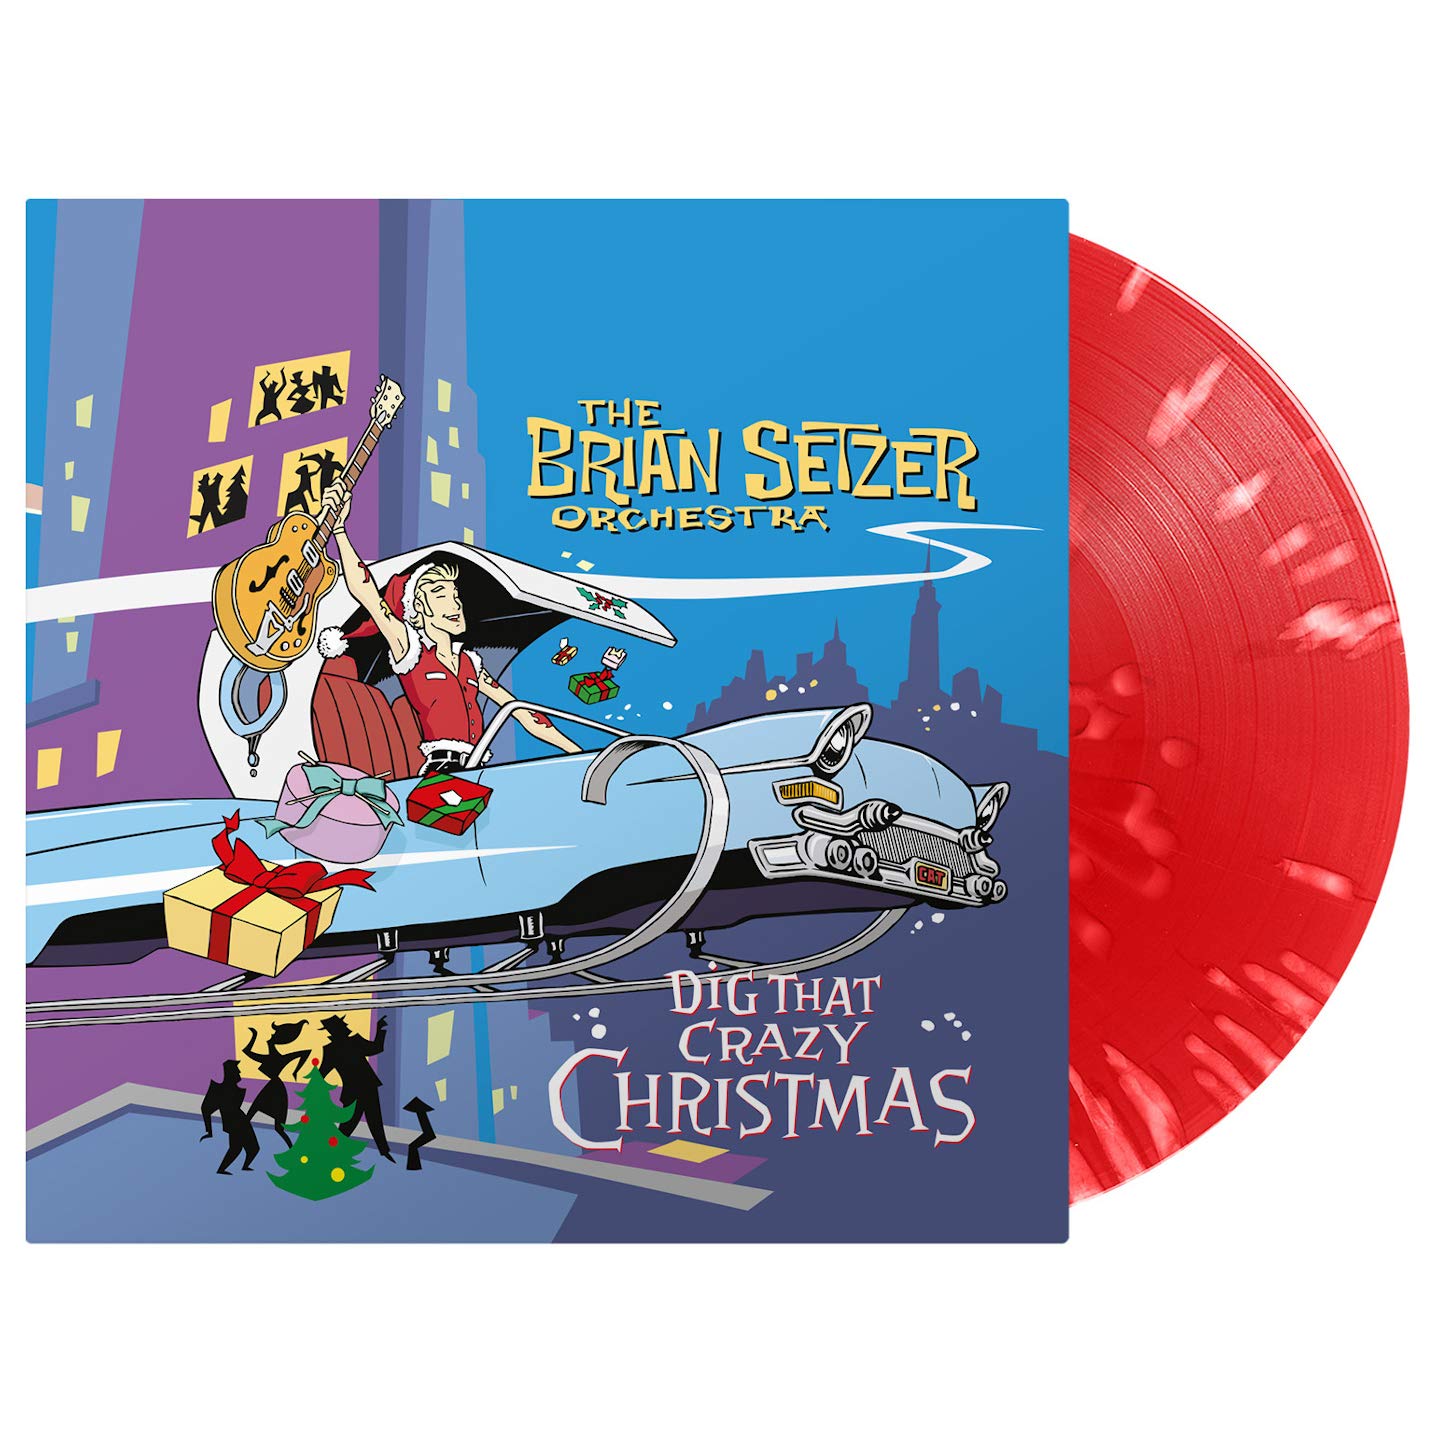 Brian Setzer Orchestra, The - Dig That Crazy Christmas (Red/White Splatter) - LP